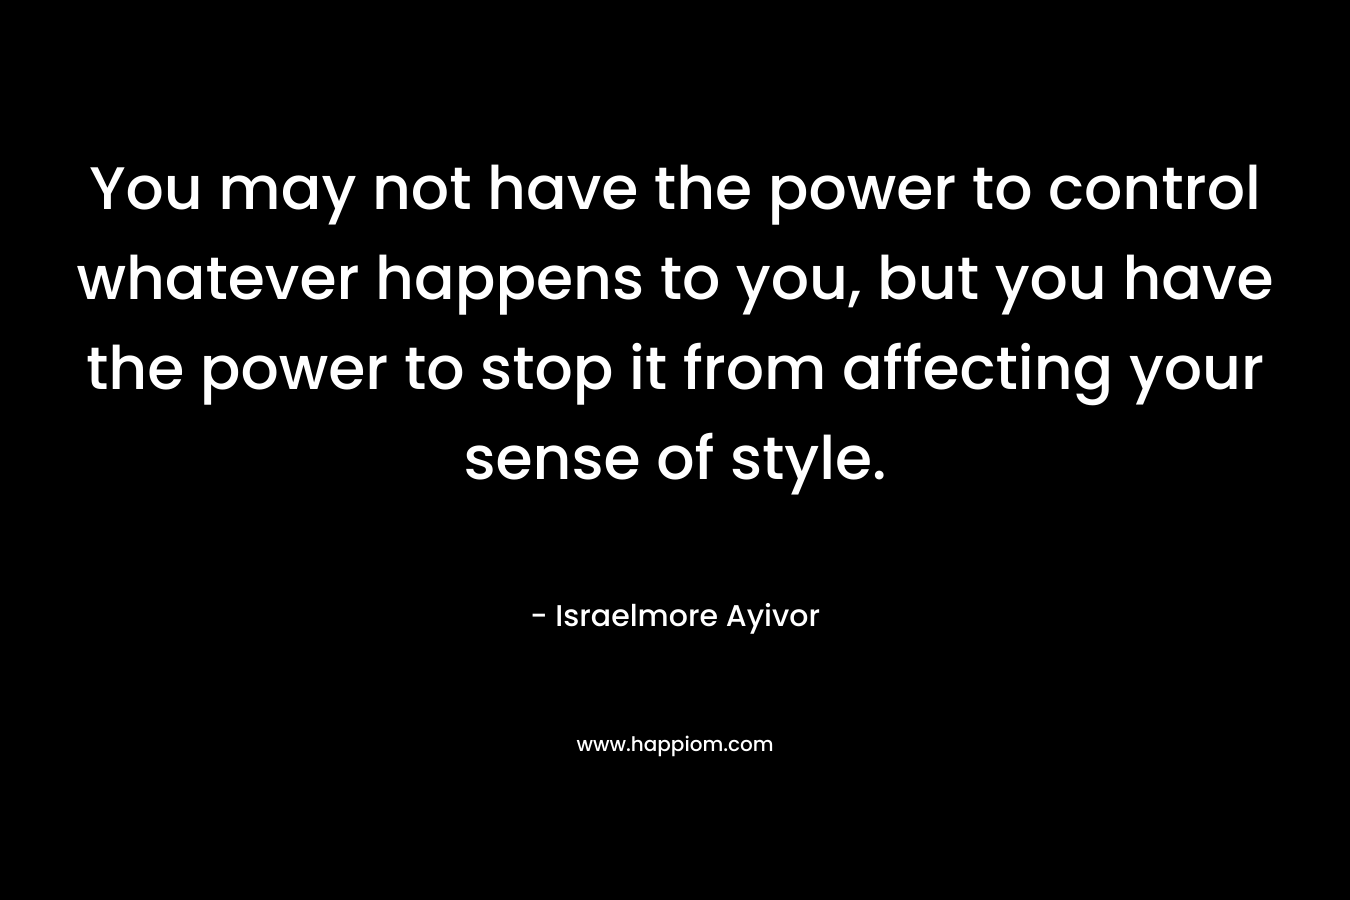 You may not have the power to control whatever happens to you, but you have the power to stop it from affecting your sense of style. – Israelmore Ayivor